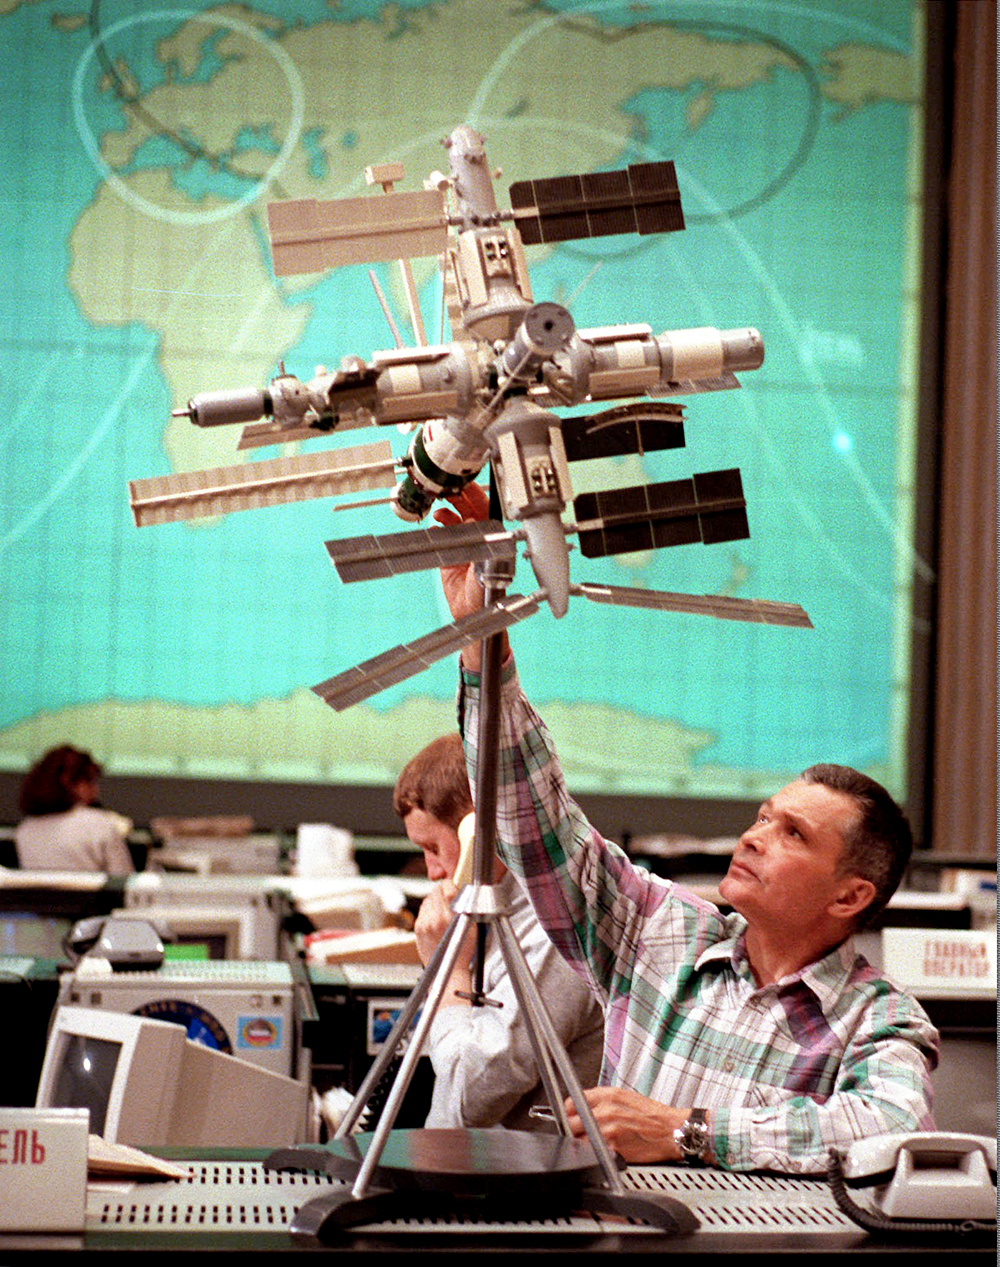  A flight controller adjusts a model of the Mir station at the Russian Mission Control center near Moscow, during a spacewalk performed by the Mir's two Russian cosmonauts, Wednesday, April 22, 1998. Cosmonauts Talgat Musabayev and Nikolai Budarin spent more than six hours in open space Wednesday to install a new orientation engine on the outside of the orbiter. Orientation engines keep the Mir pointed toward the sun, to allow the station's solar batteries soak up maximum energy. Foto: AP